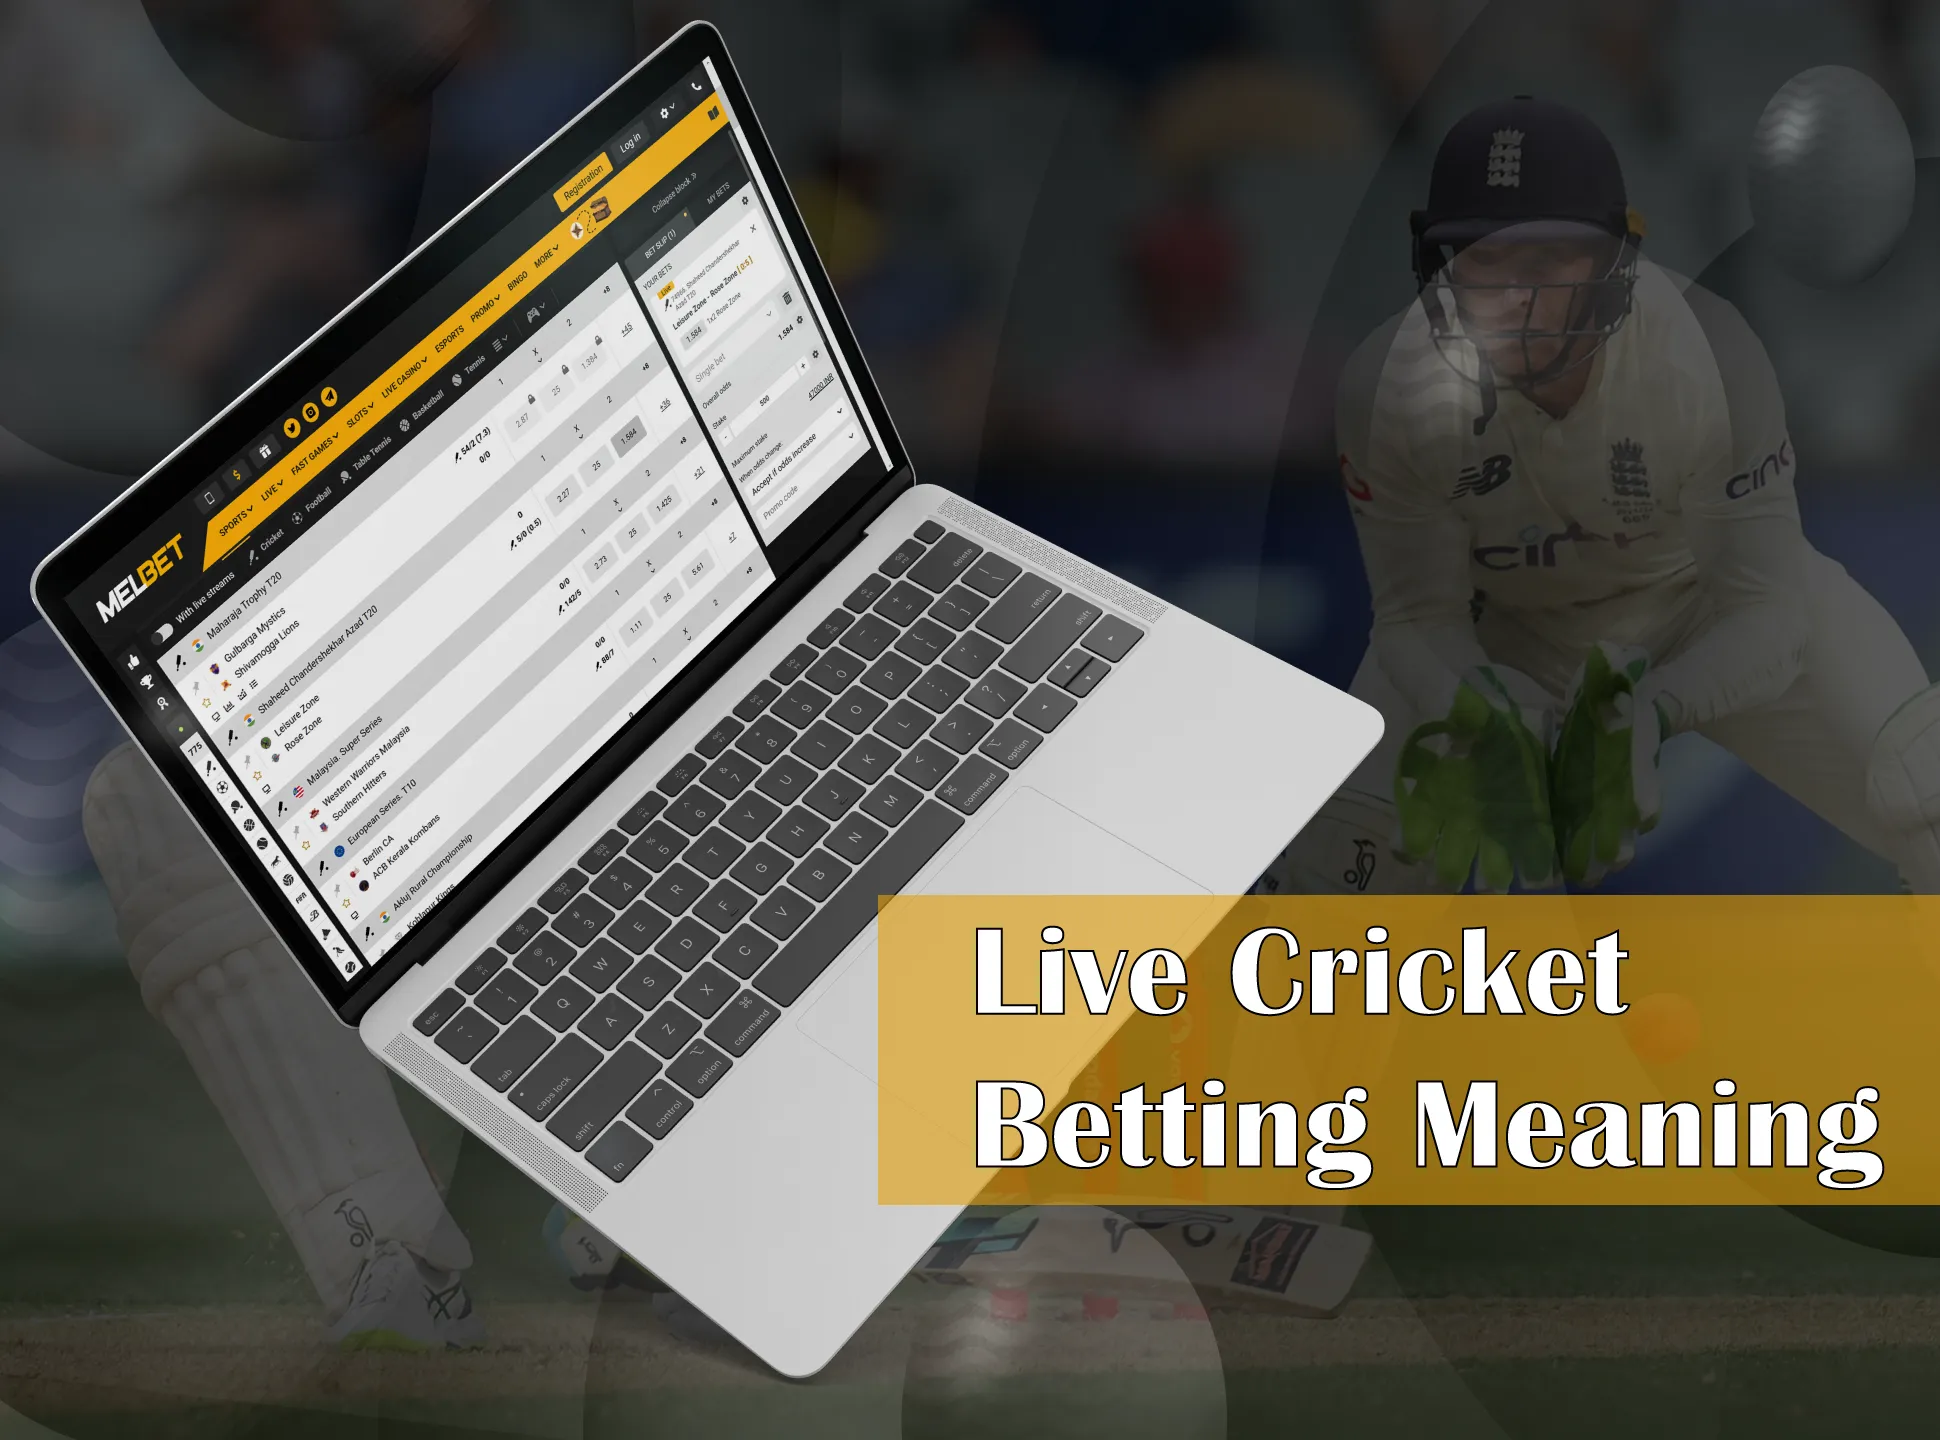 Users from India can enjoy the matches and also place bets on their favorite team right during the match.